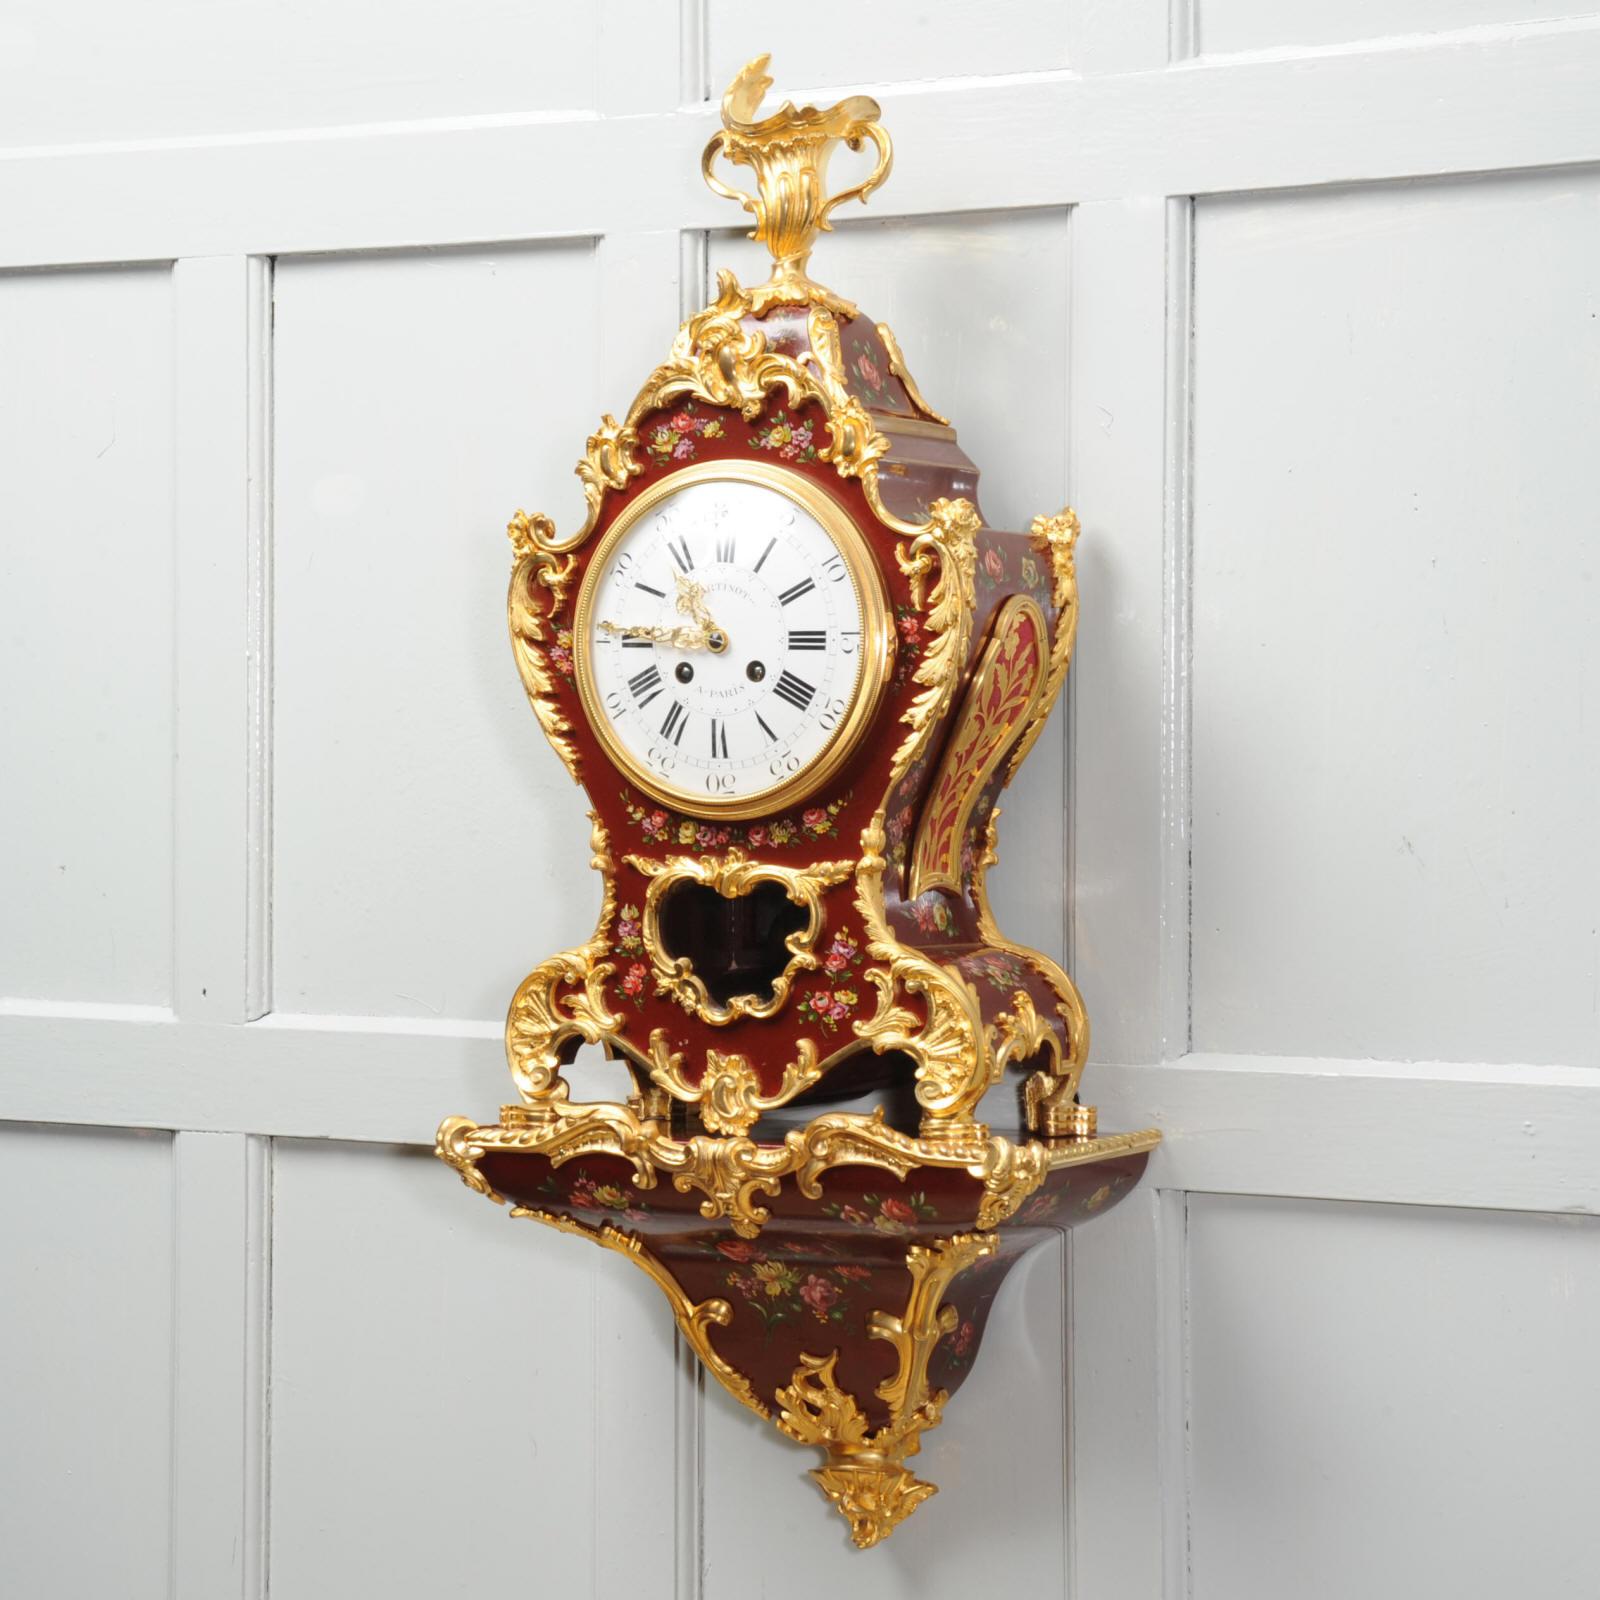 A large and stunning antique Rococo Style bracket clock with it's original bracket. Classic Rococo shape in exquisite Vernis Martin style red lacquer, painted with delicate floral swags and mounted with crisp ormolu (finely gilded bronze) mounts.